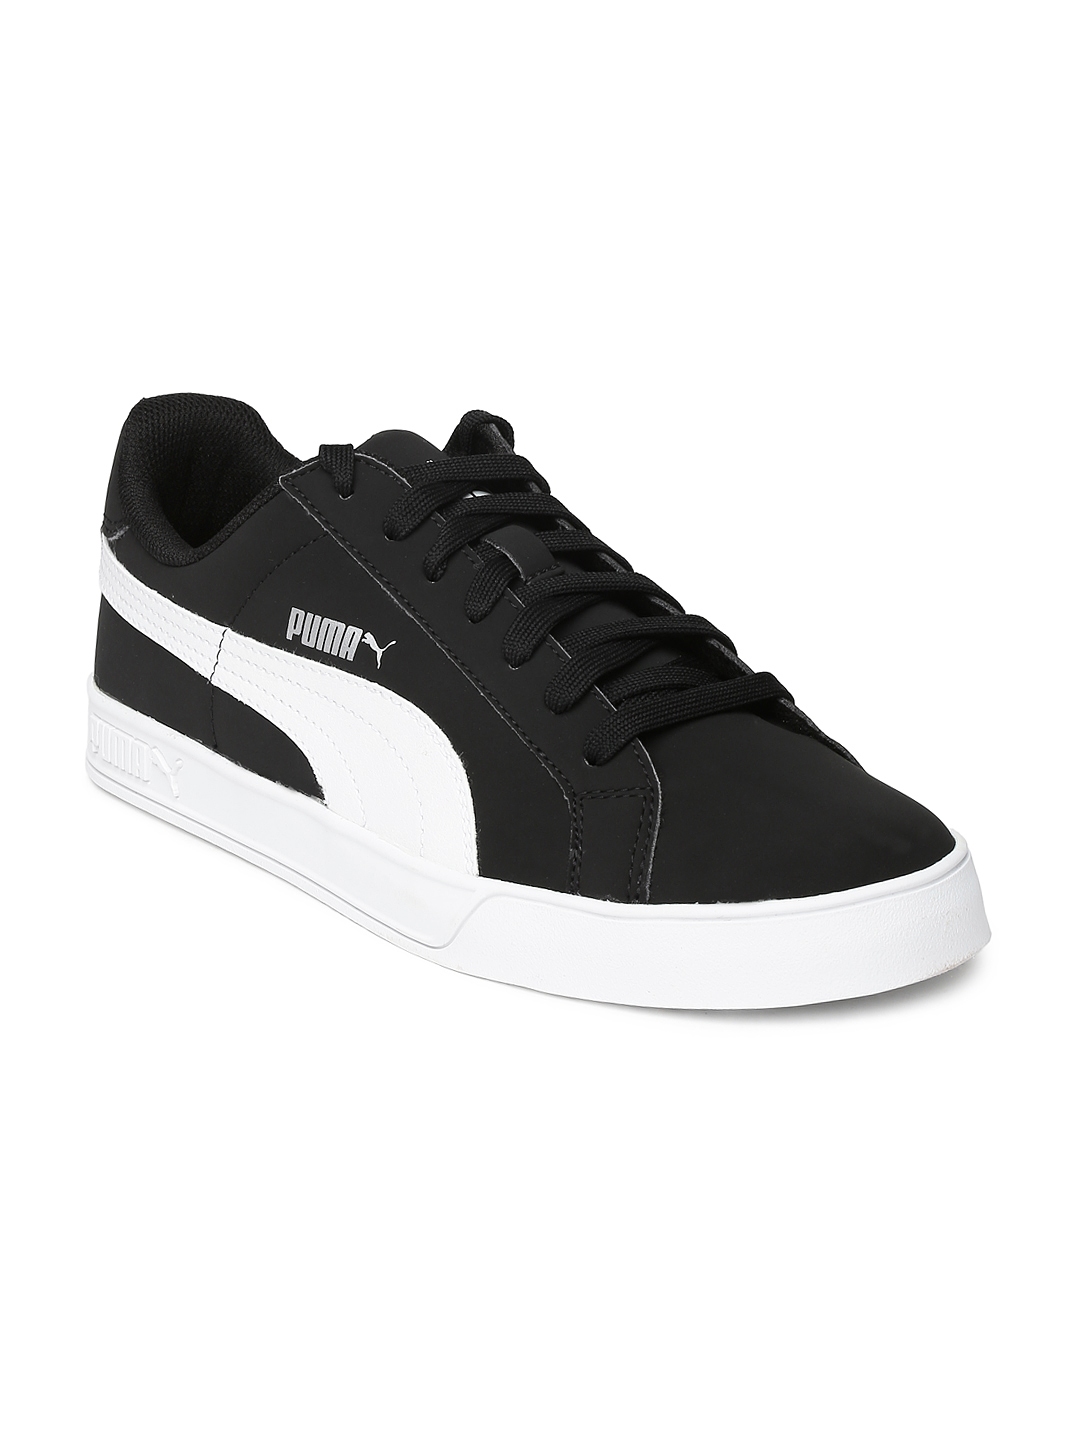 Buy PUMA Unisex Black Smash Vulc Casual Sneakers - Casual Shoes for ...